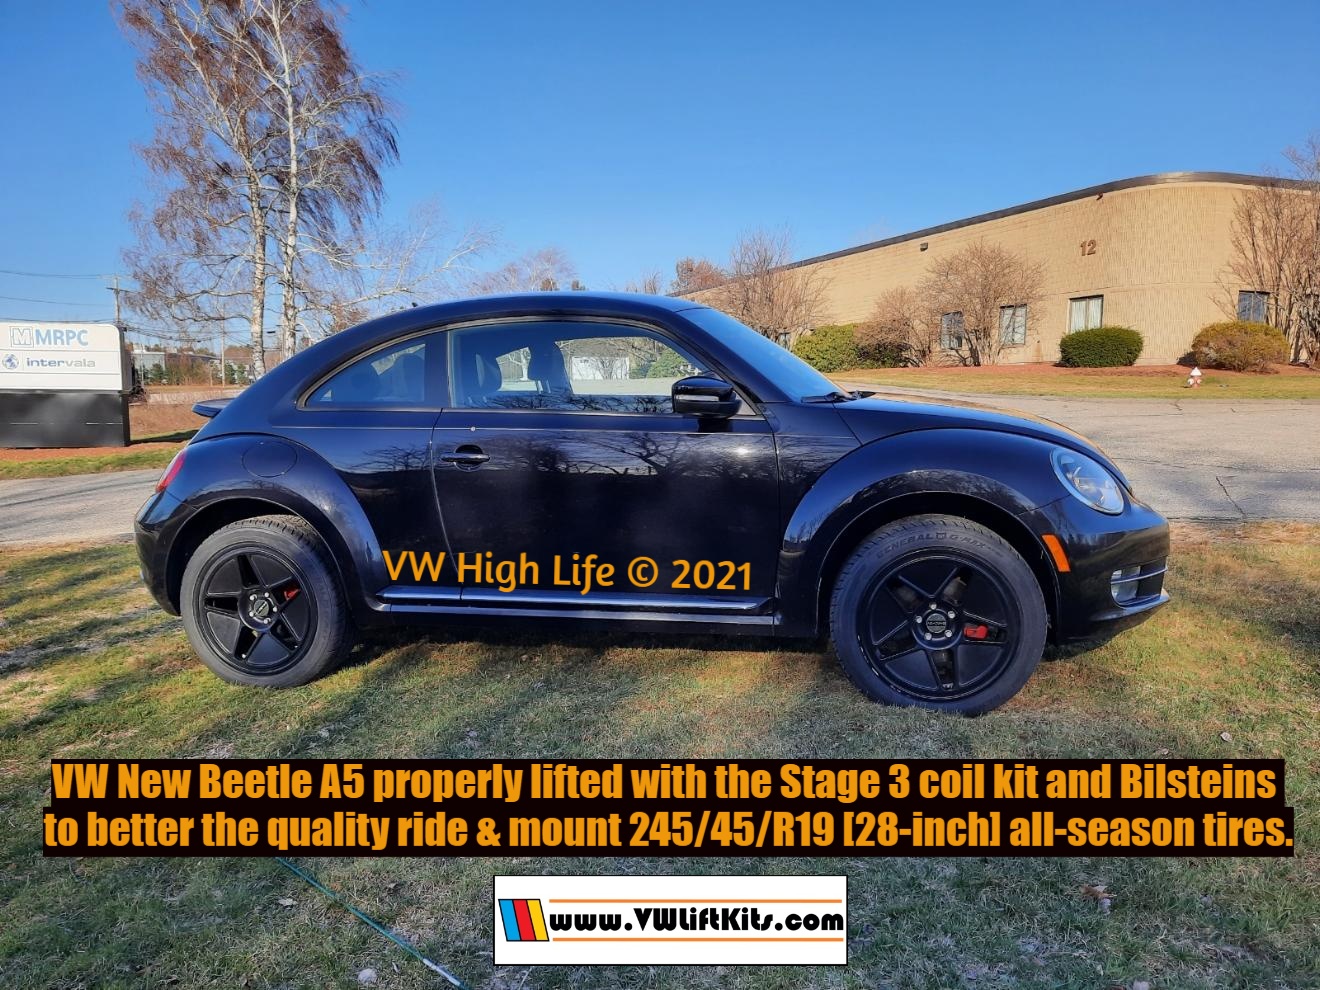 2013 VW New Beetle lifted properly with Stage 3 Coils and Bilsteins for 245/45/R19 (28-inch) all-season tires!